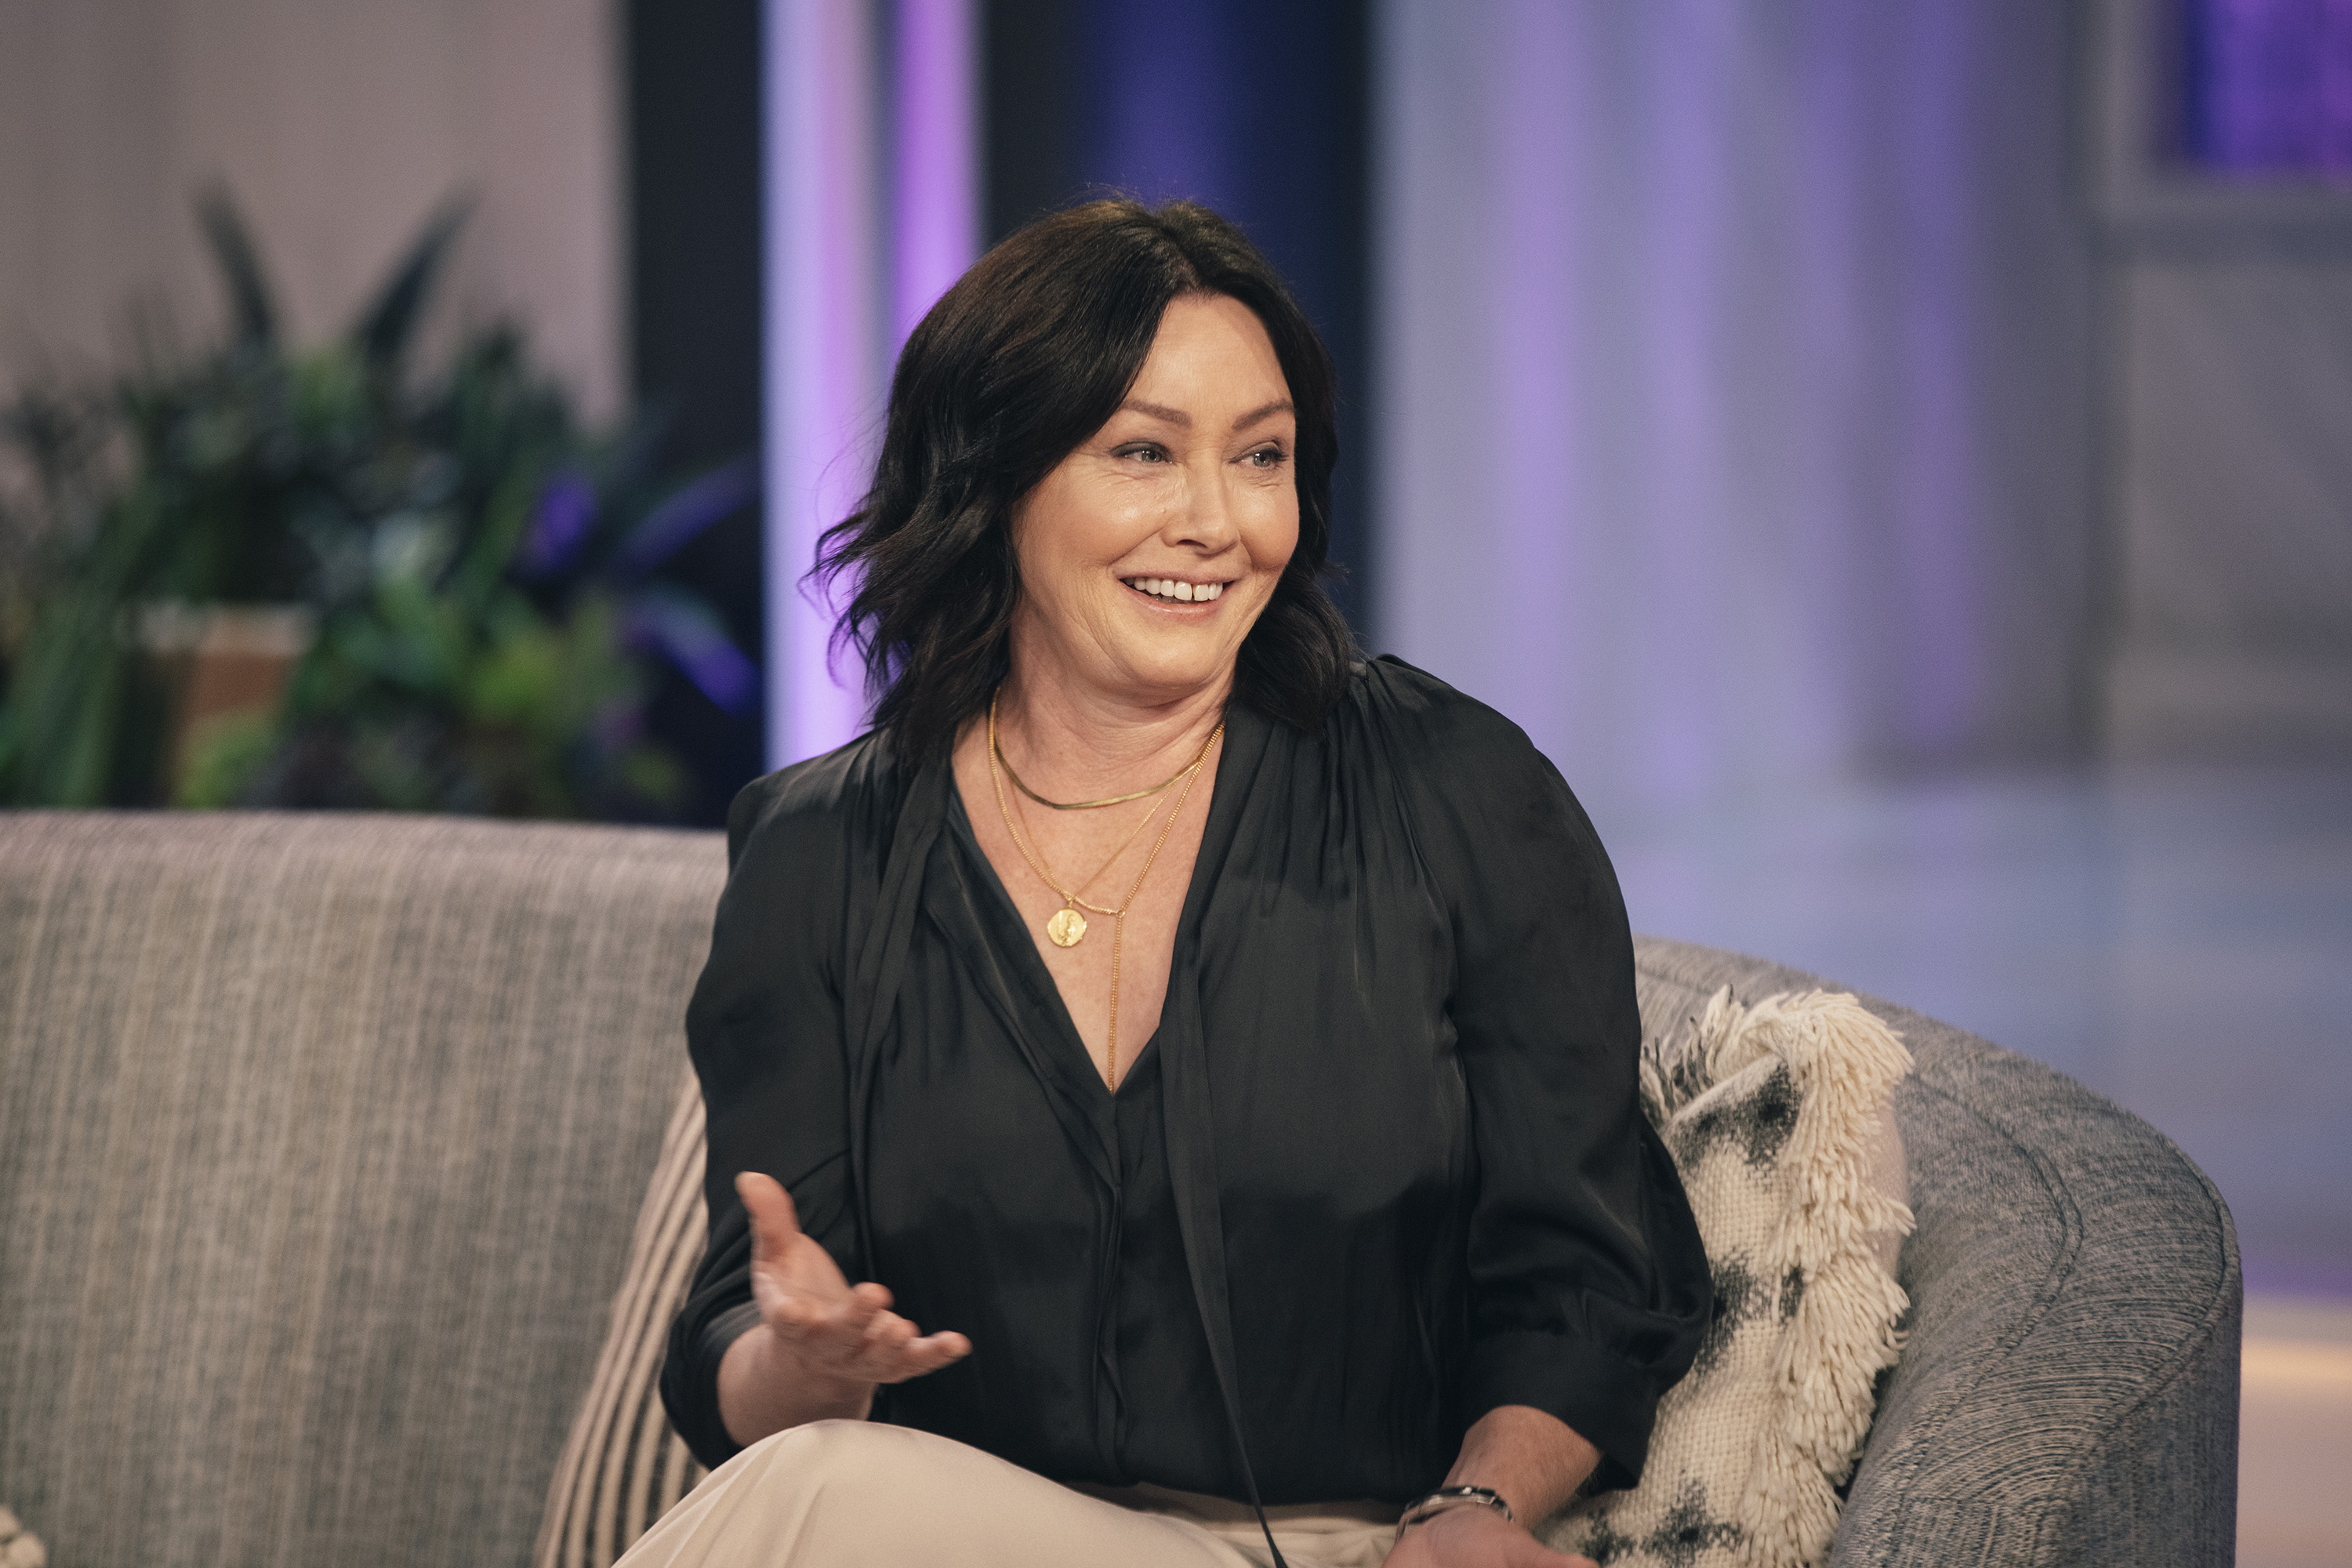 Shannen Doherty on an episode of "The Kelly Clarkson Show" in 2021 | Source: Getty Images